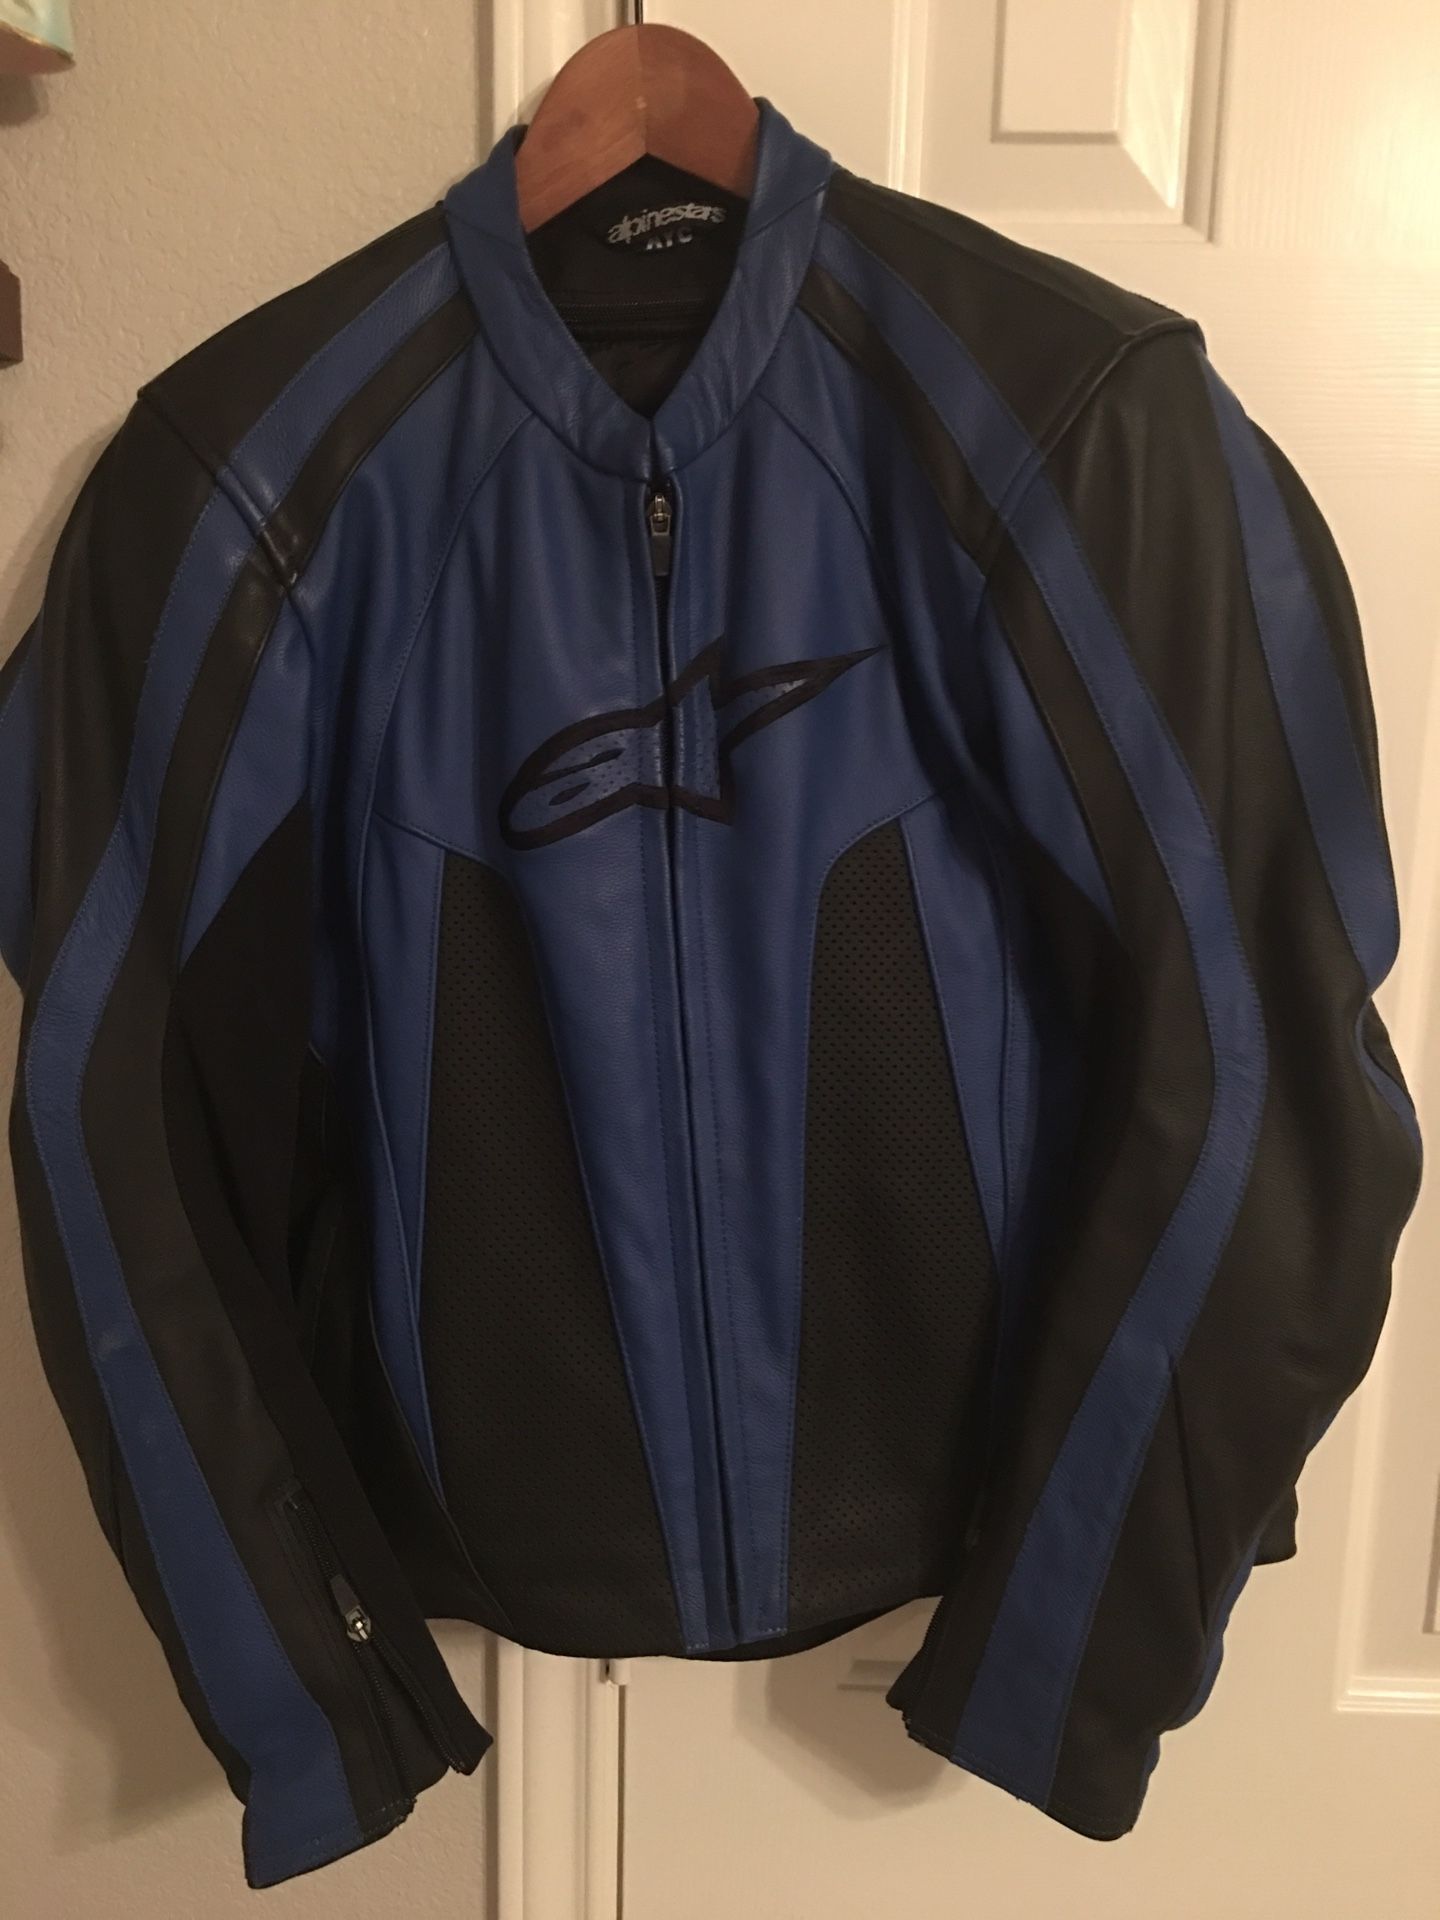 Alpine leather jacket hardly used. Size 40 with hard cover arms and back.